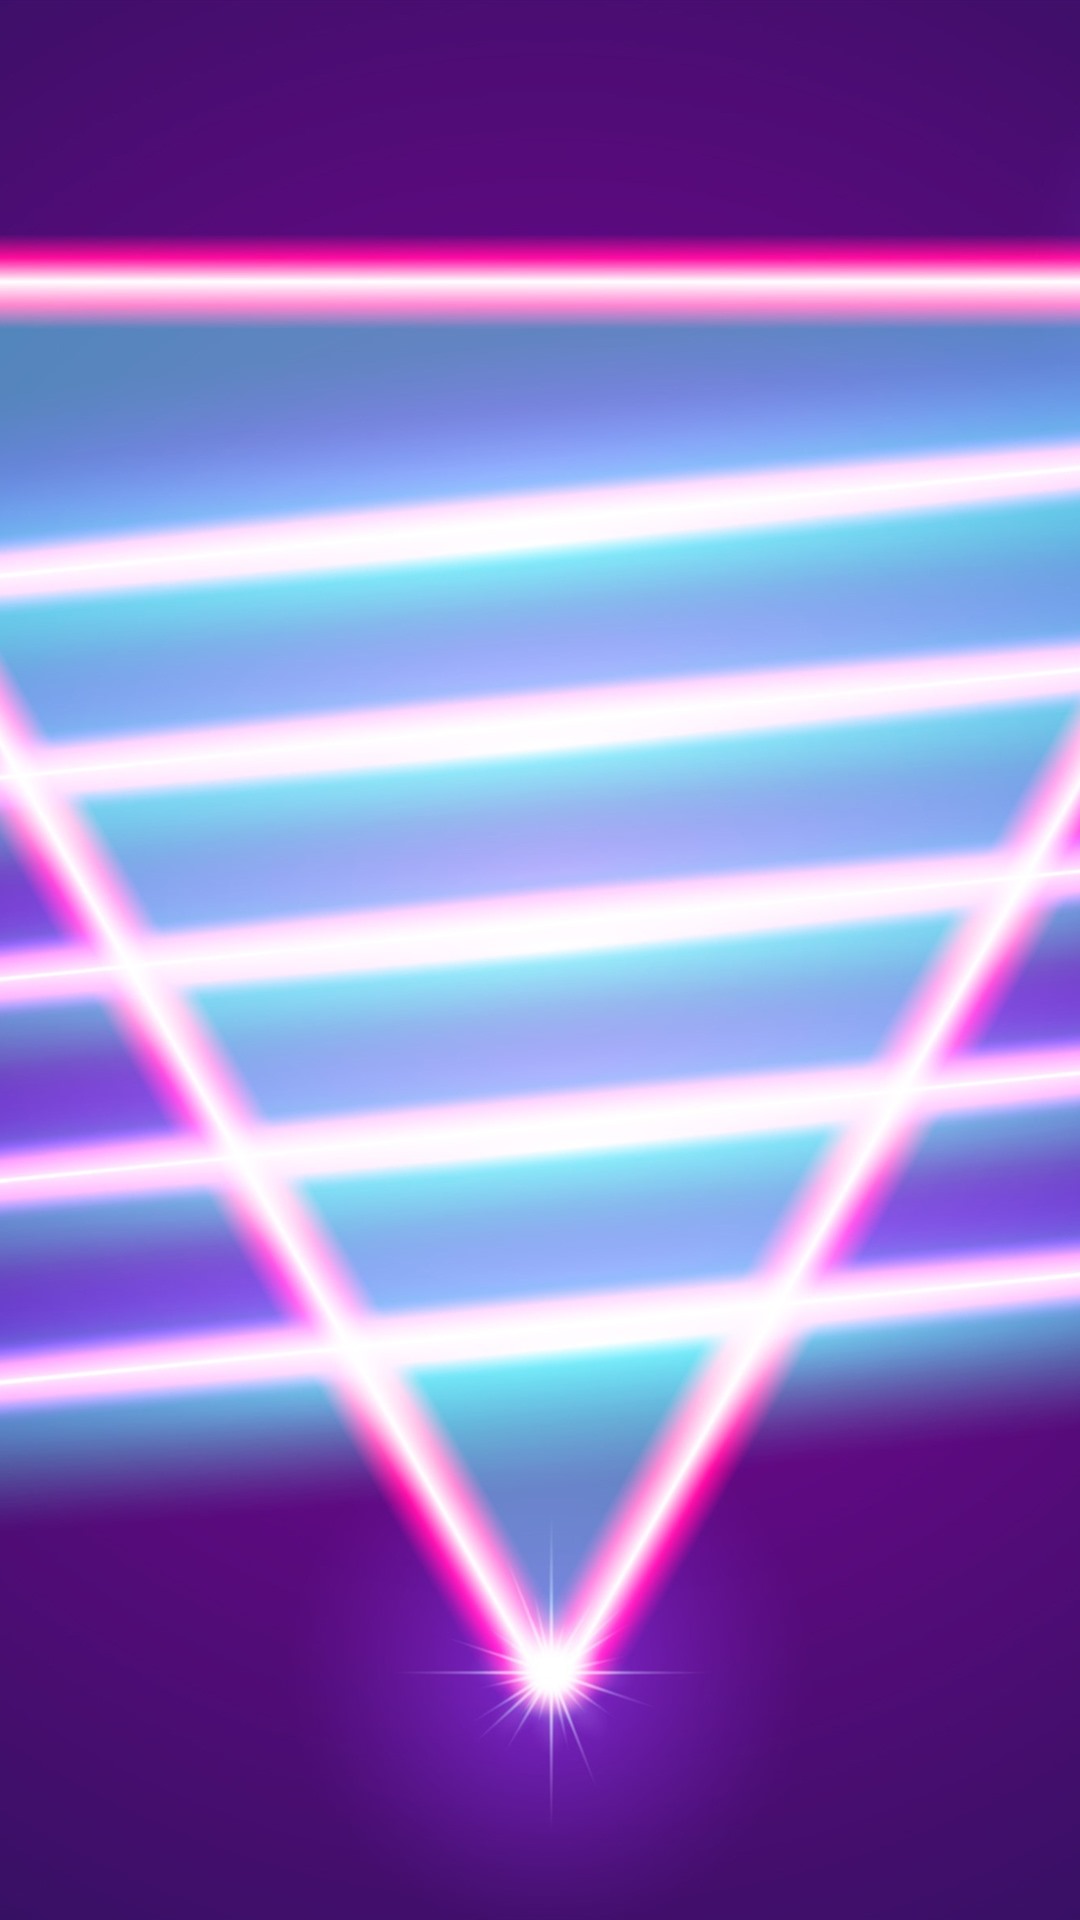 Iphone Wallpaper Neon Triangle, Abstract Light - Neon Triangle - HD Wallpaper 